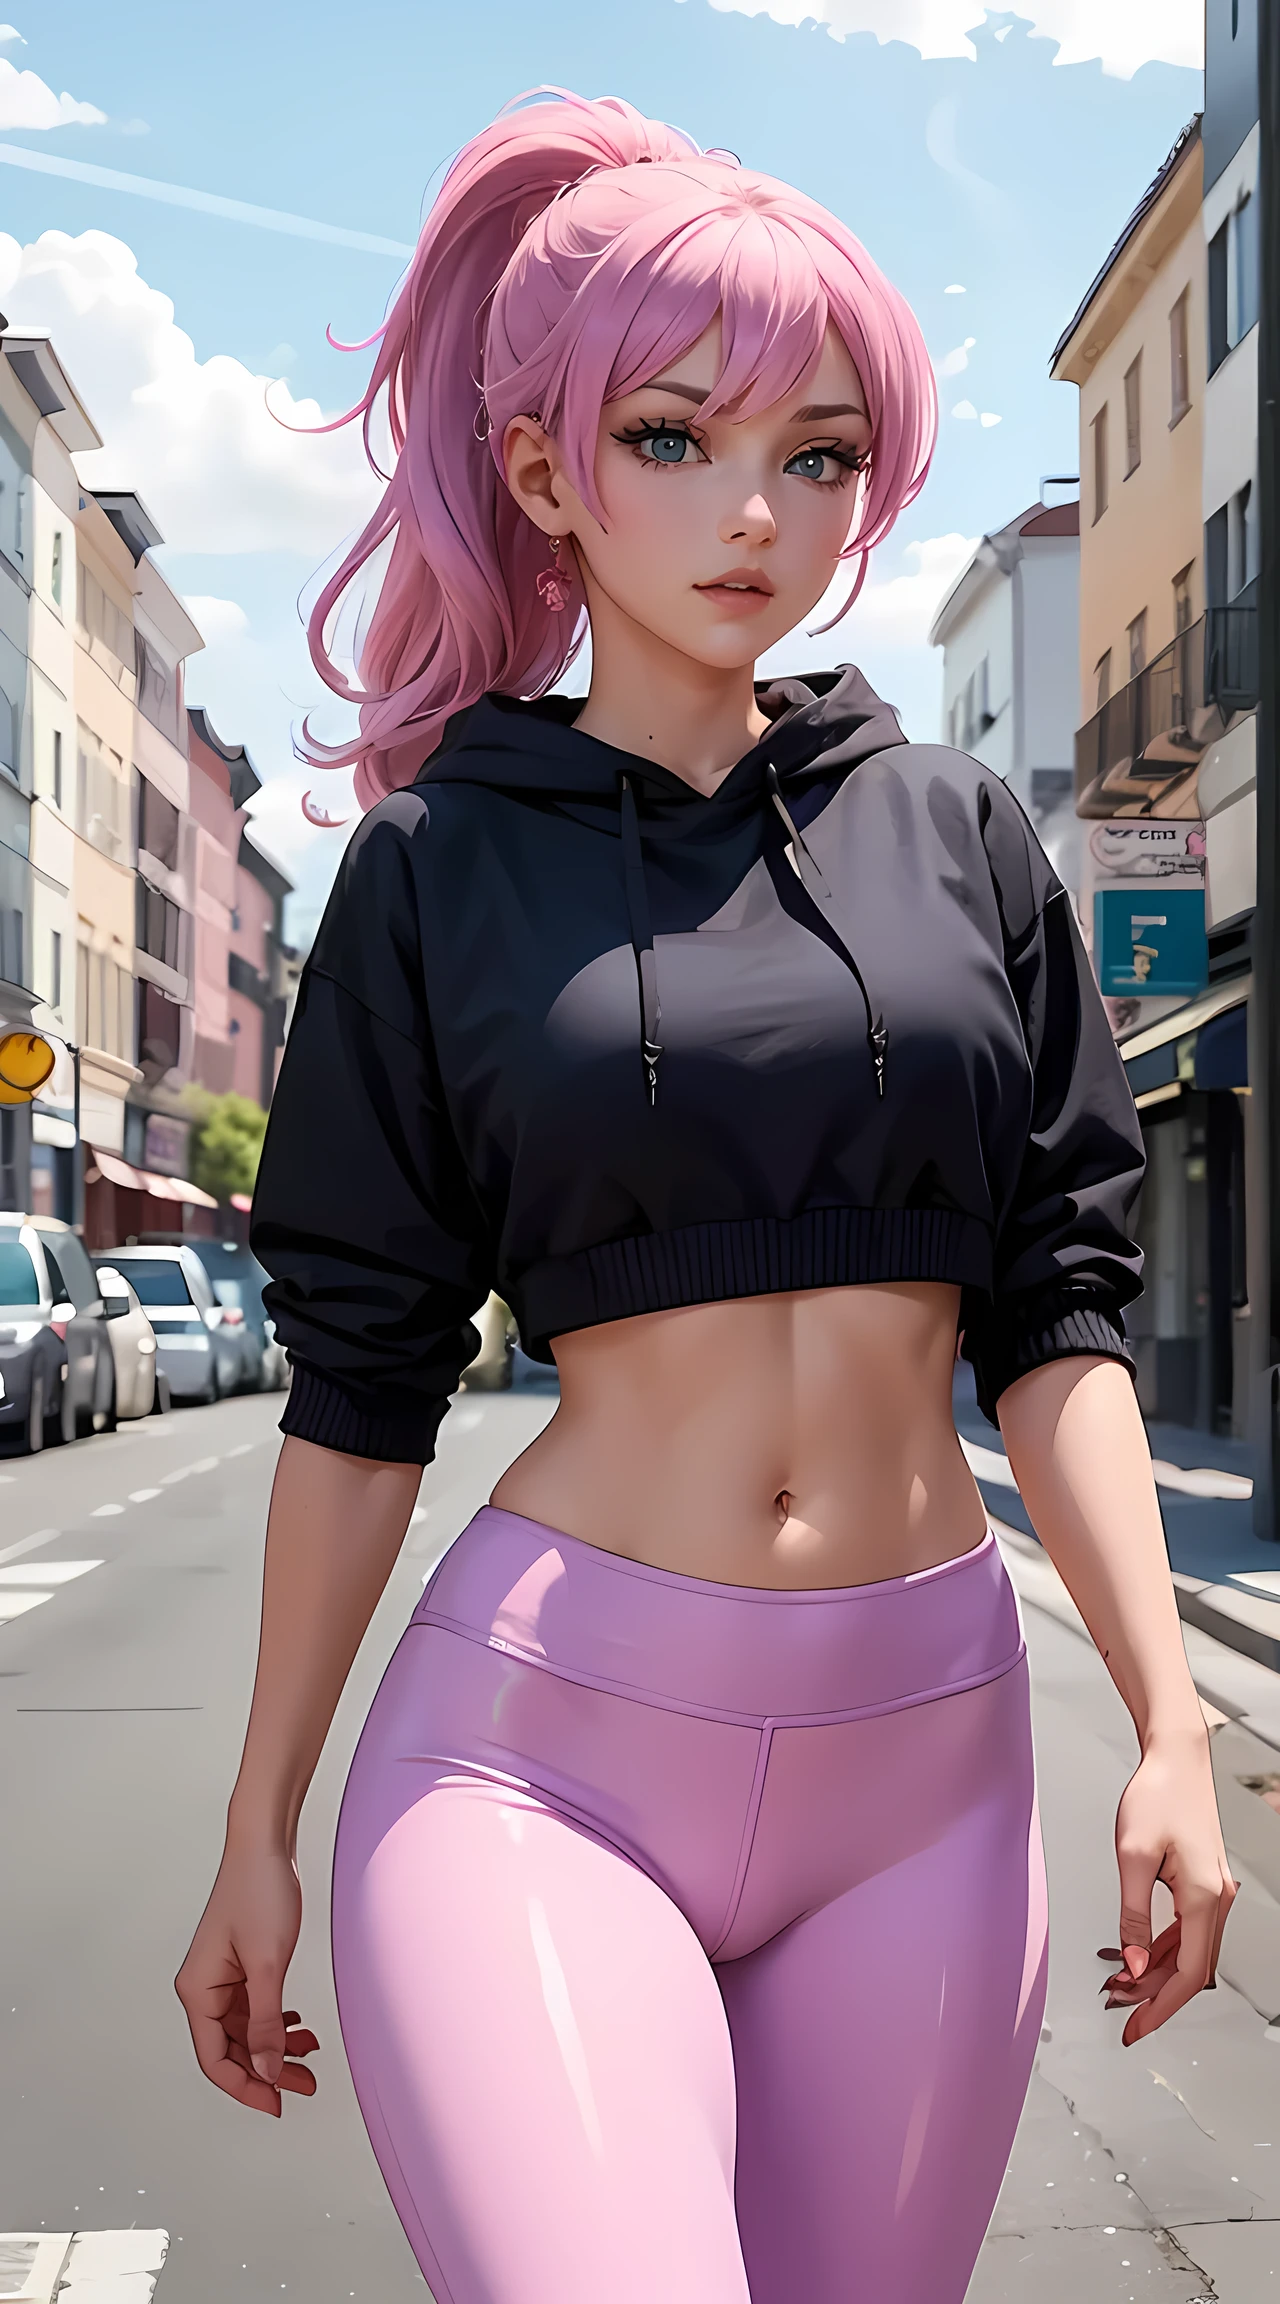 Beautiful pink hair girl is shown to have a sexy figure, she is wearing a nsfw crop hoodie and leggings, ponytail, happy look, blue eyes, girl walking down a neighborhood,sexy session, sexy pose, cowboy shot, superior quality, many details, realistic